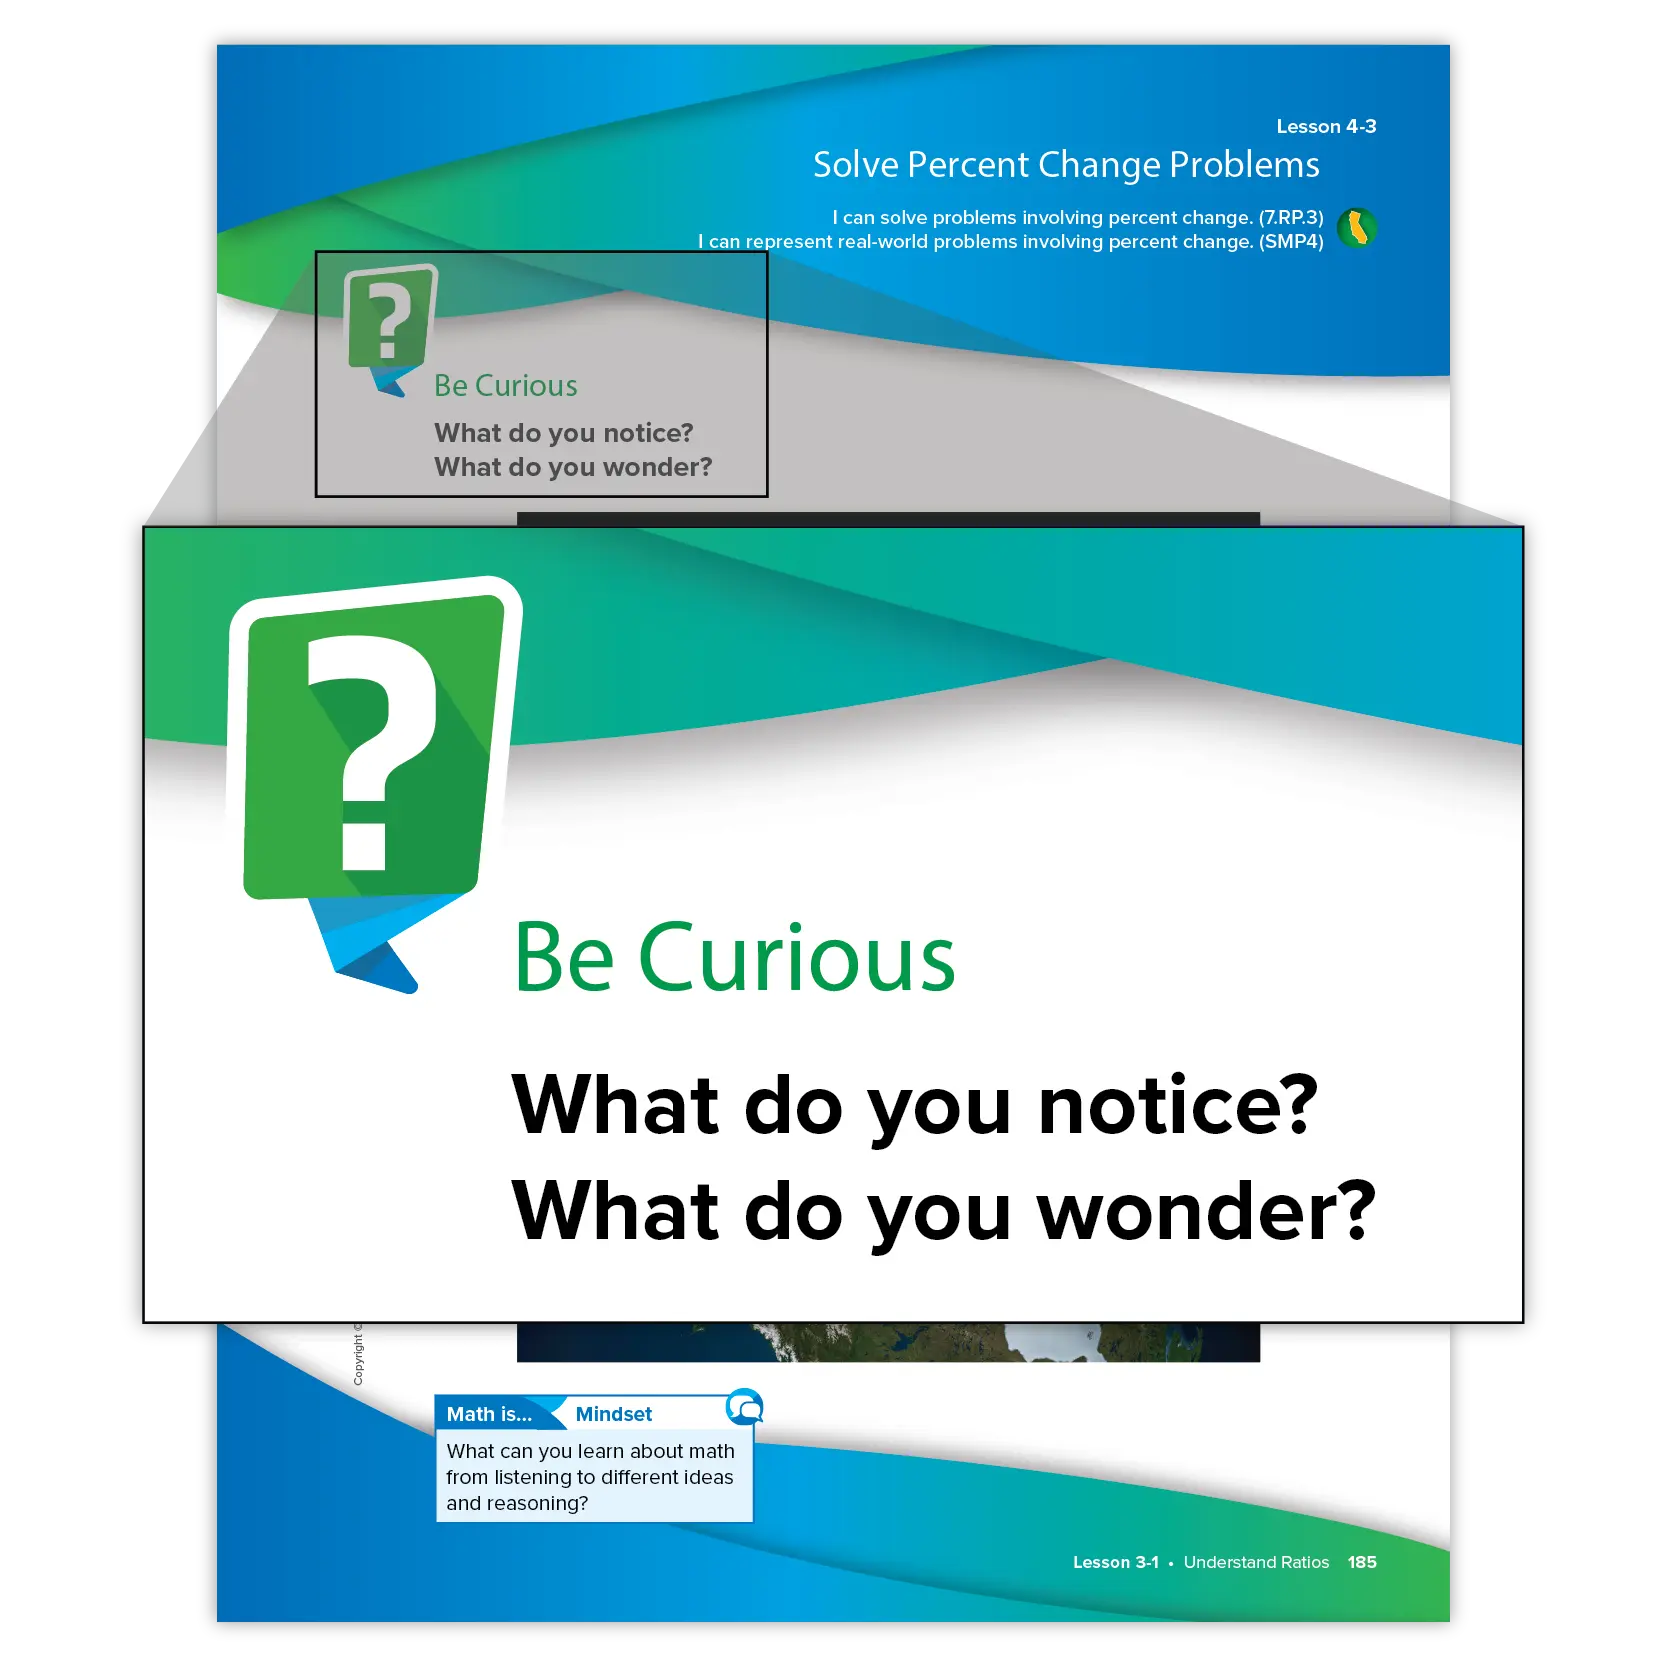 A highlighted excerpt from the textbook says,  “Be Curious. What do you notice? What do you wonder?”